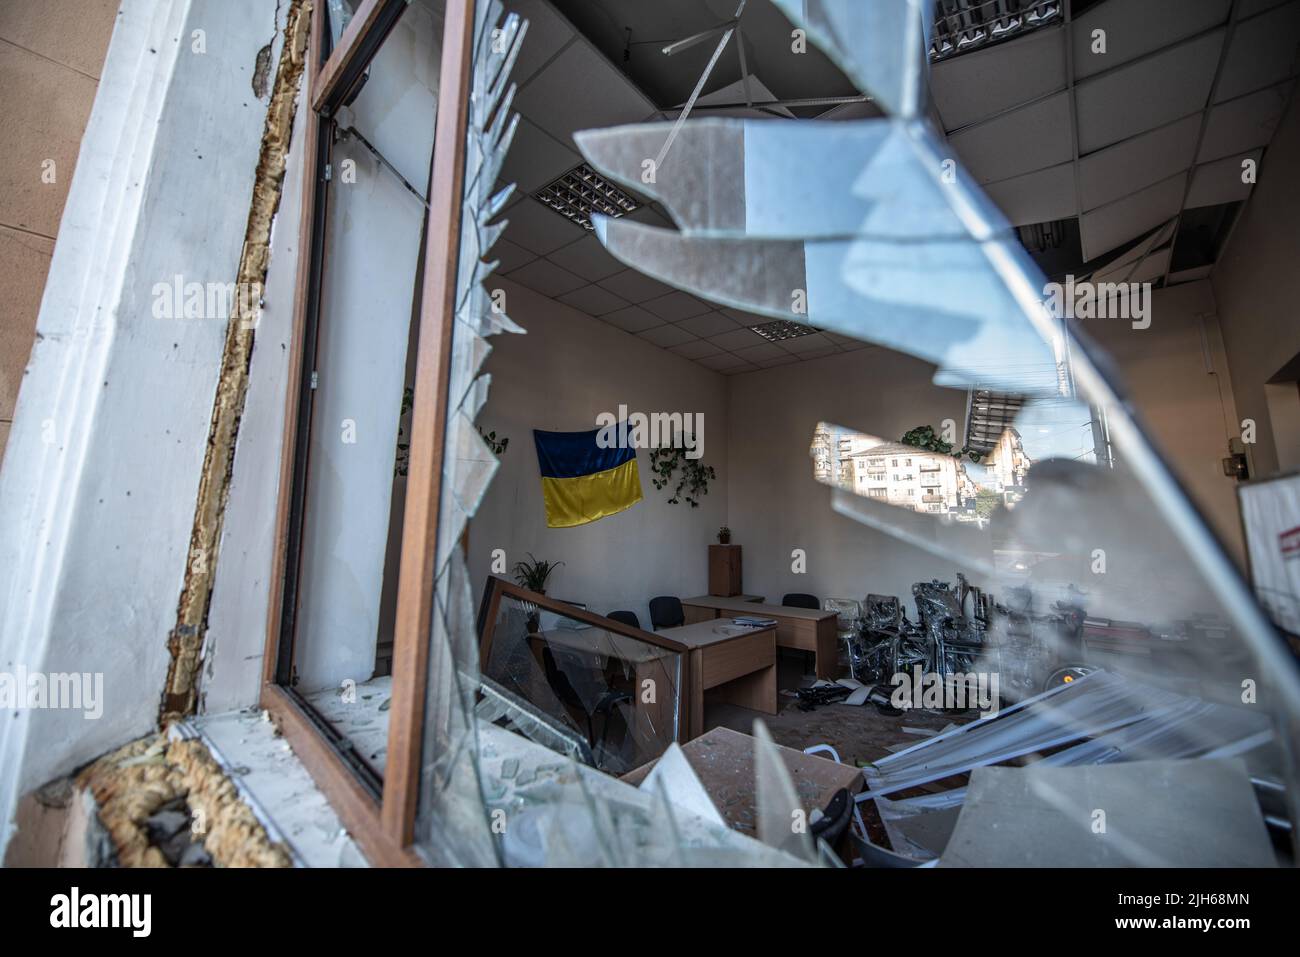 Vinnytsia, Ukraine. 15th July, 2022. A Ukrainian flag still hangs on the wall inside a broken window of the interior of the government offices that were attacked yesterday by the Russians in the city of Vinnytsia. (Credit Image: © Hector Adolfo Quintanar Perez/ZUMA Press Wire) Credit: ZUMA Press, Inc./Alamy Live News Stock Photo